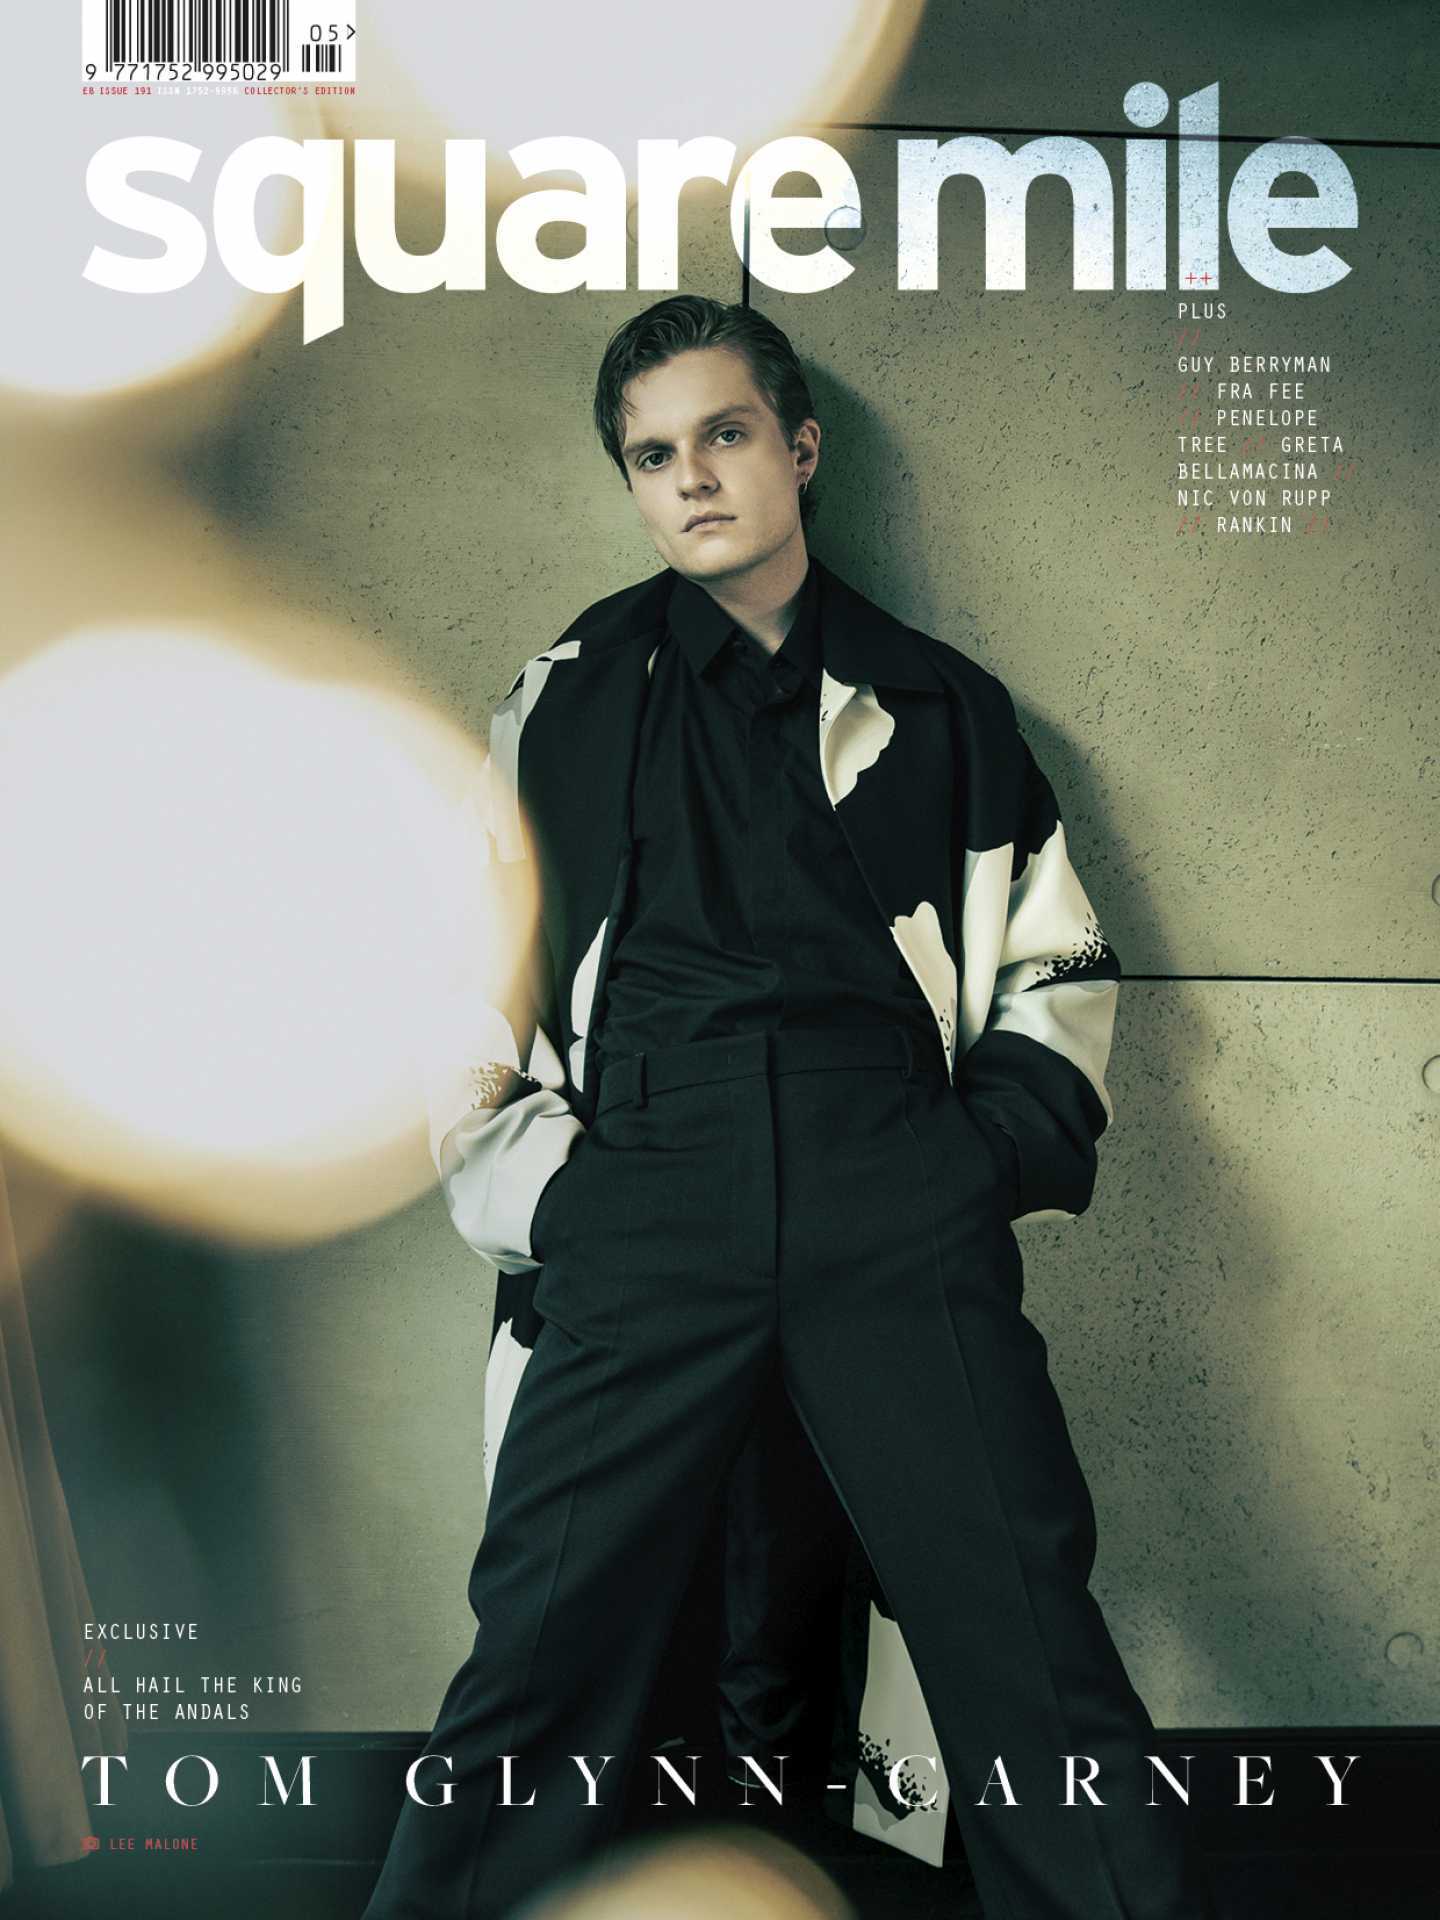 Tom Glynn-Carney photographed by Lee Malone for Square Mile